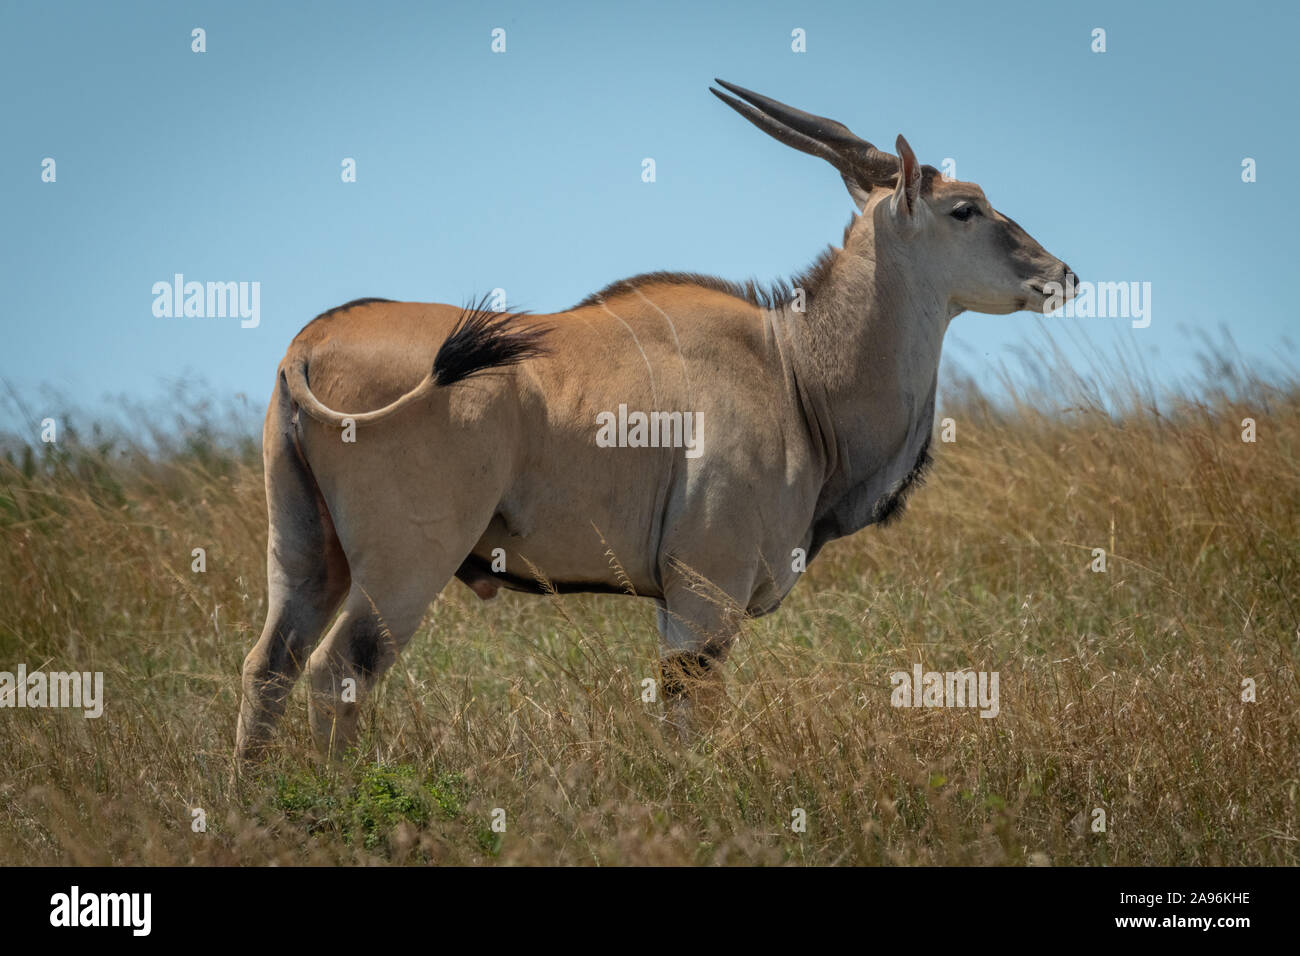 Common eland stands in grass flicking tail Stock Photo